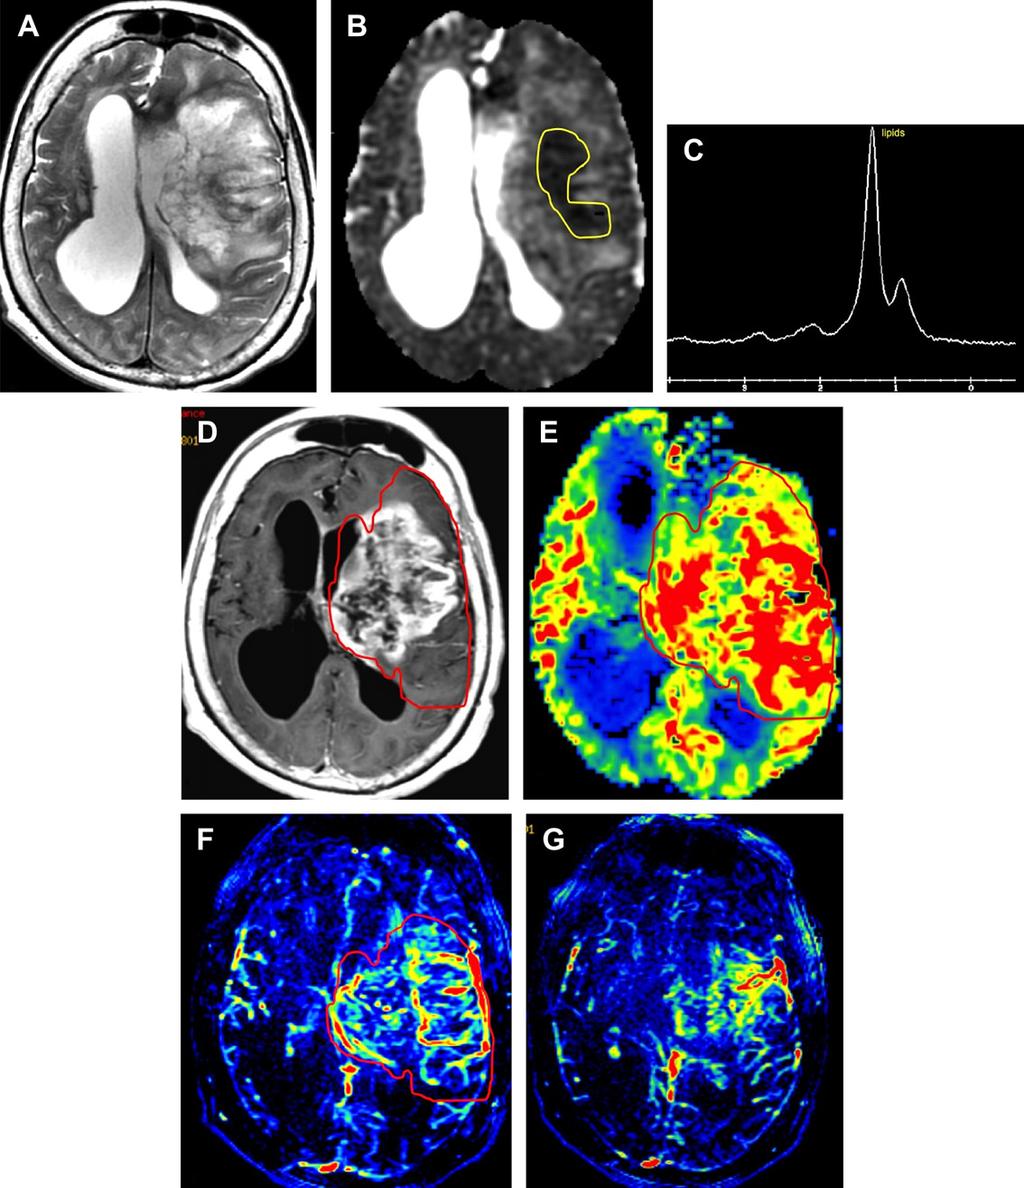 214 Brandão etal Fig. 16. Grade IV glioma. A 64-year-old woman found unconscious. There is a large heterogeneous lesion involving the left frontal and parietal lobes (A: axial T2).